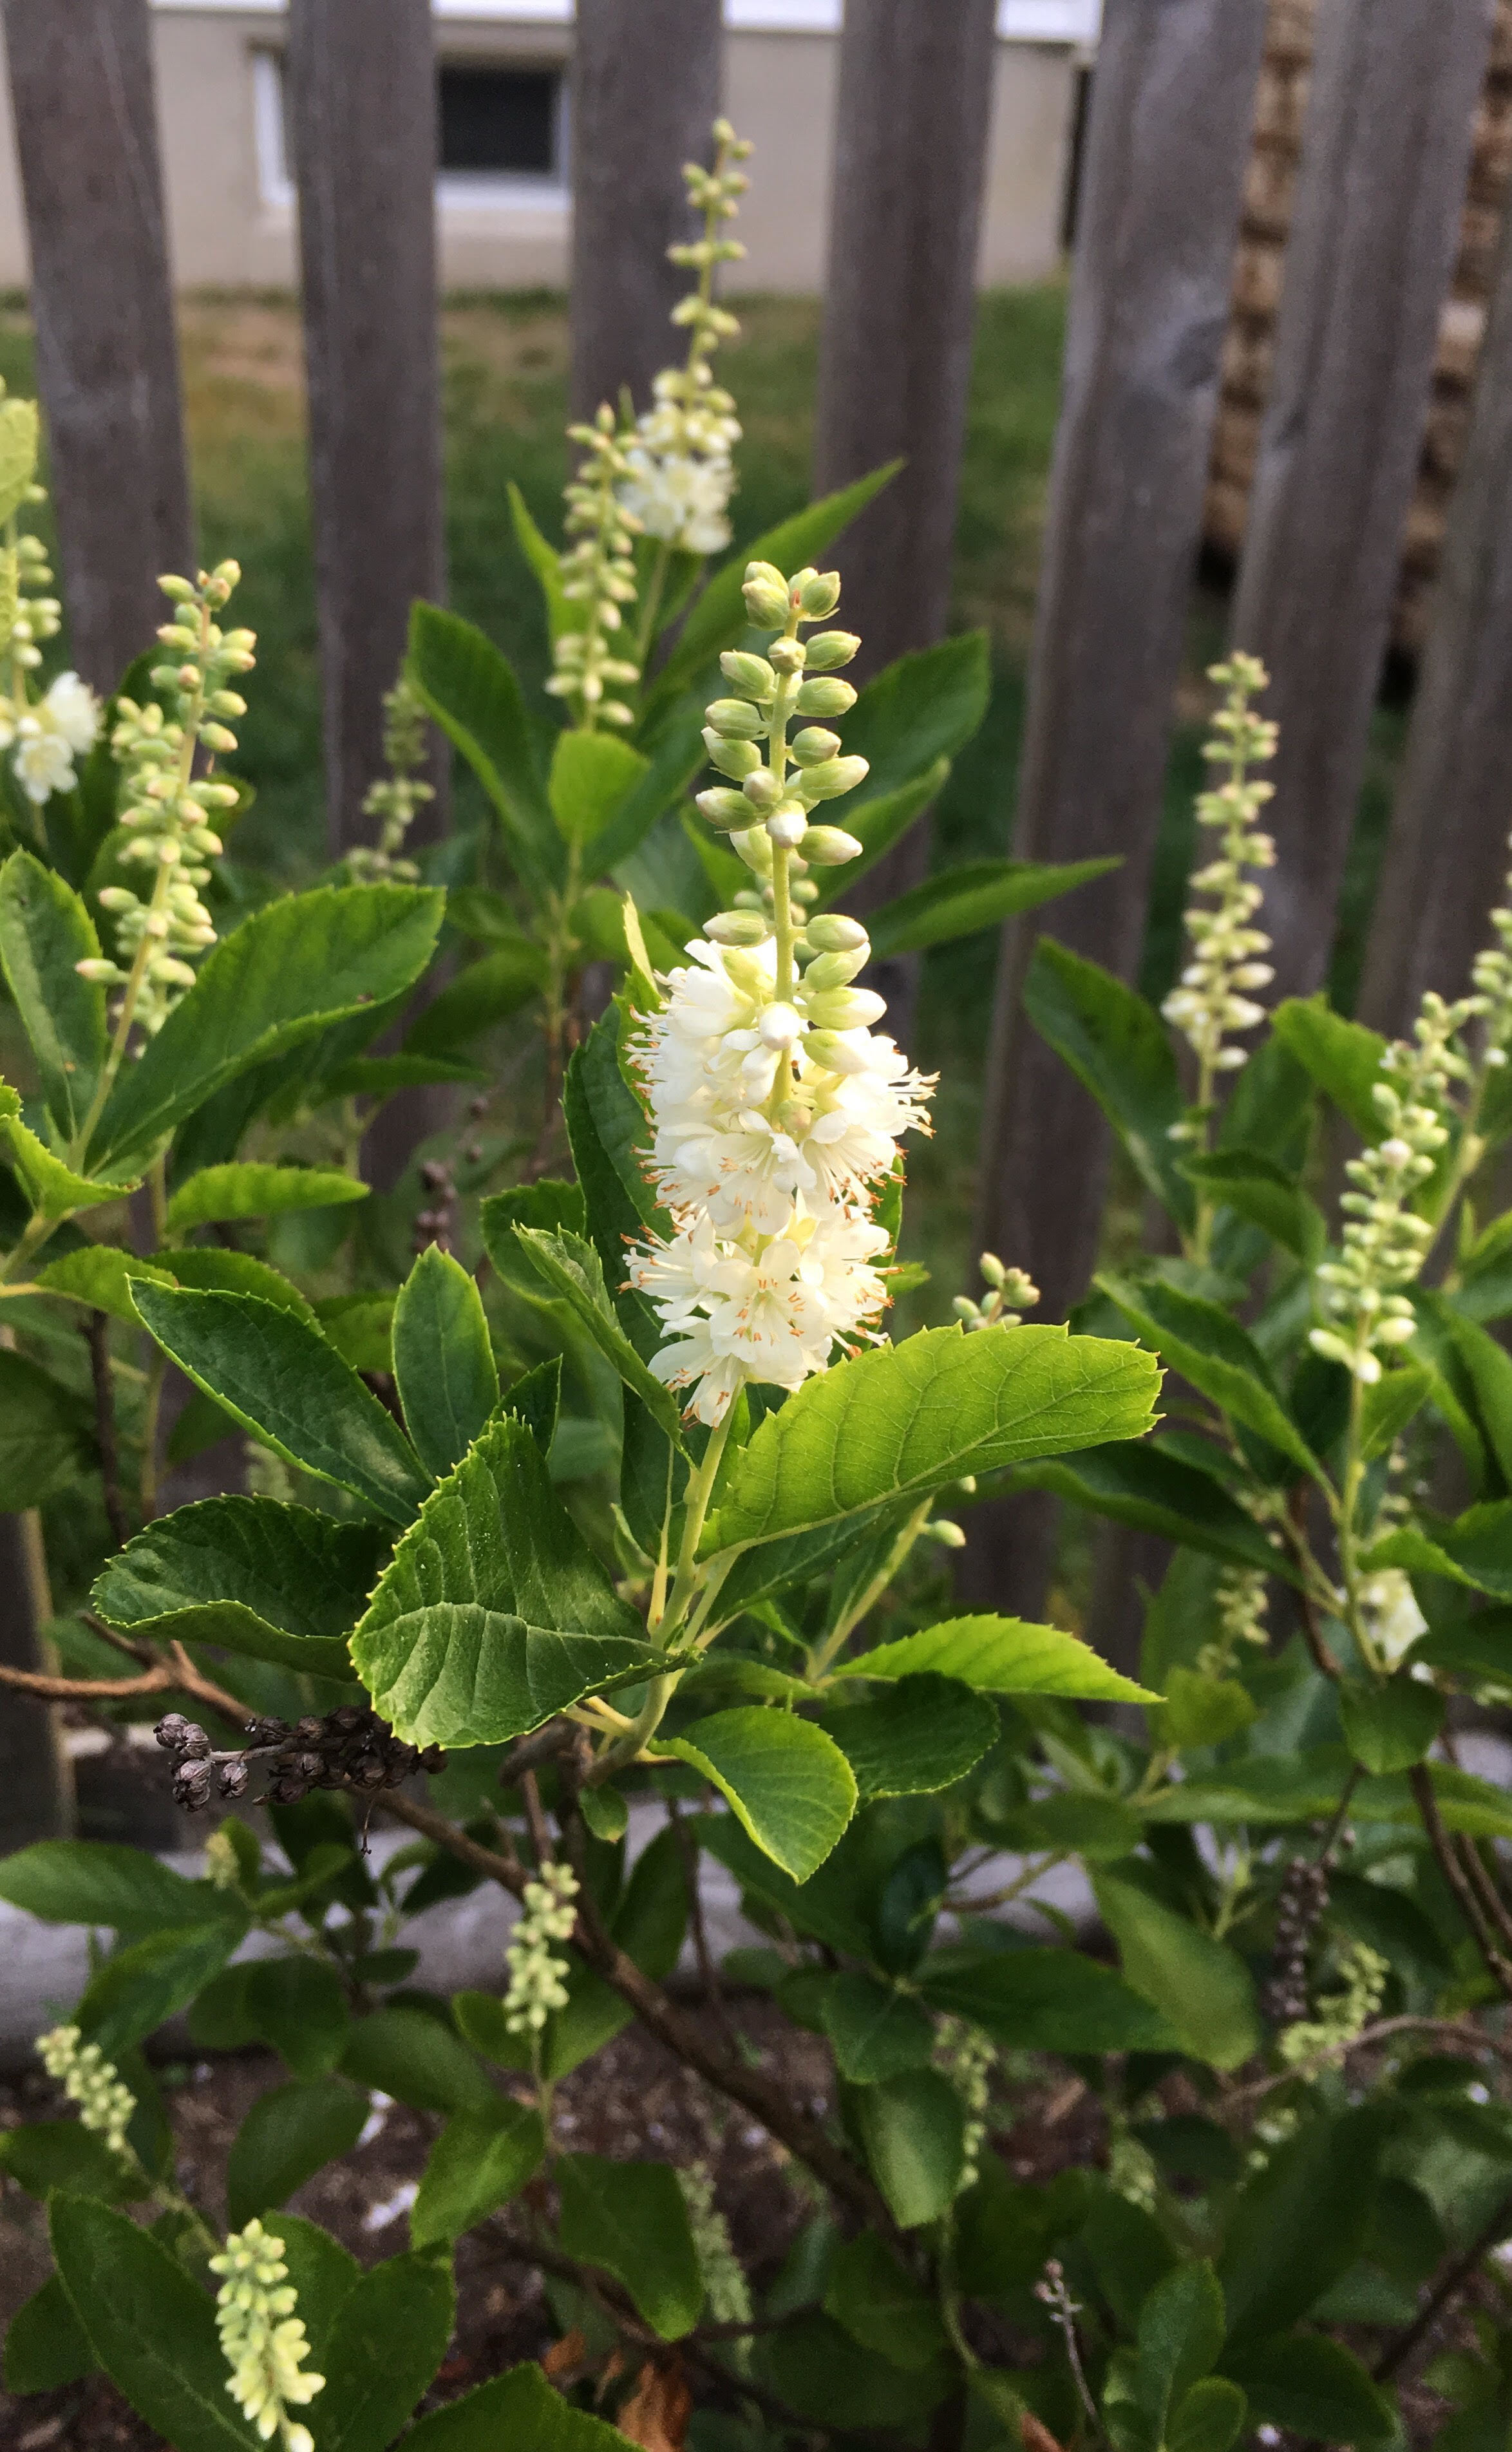 Clethra alnifolia blossom. Photo by Ginger Laurits.